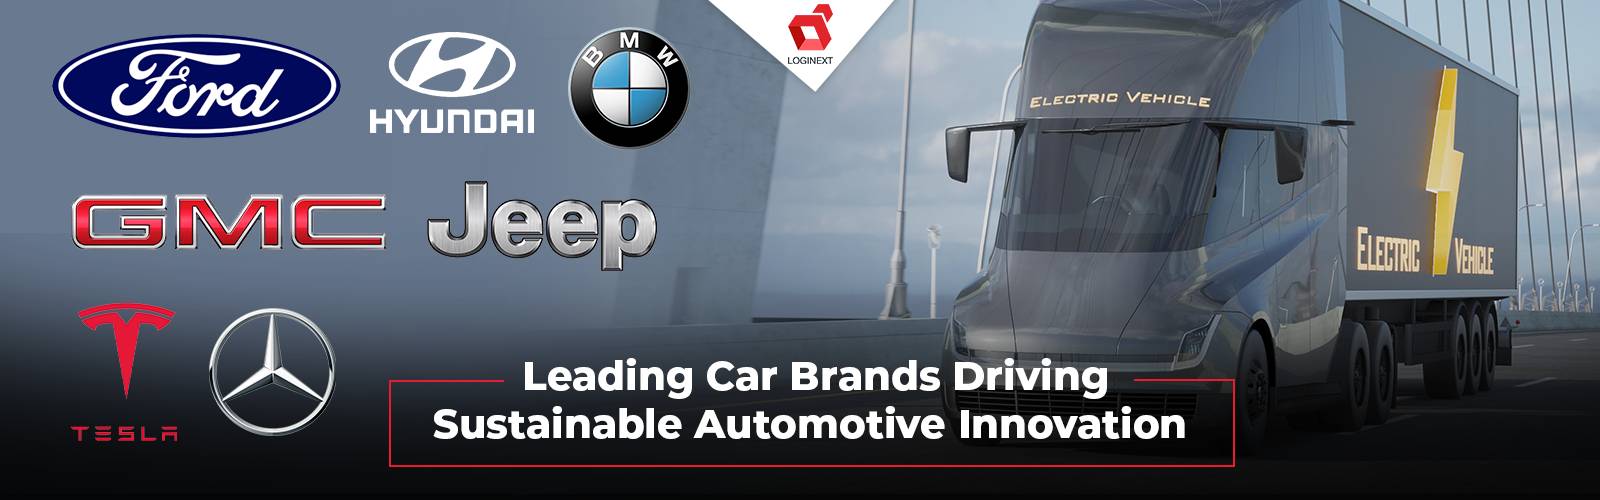 Sustainable Automotive Innovation Achieved By Top Brands